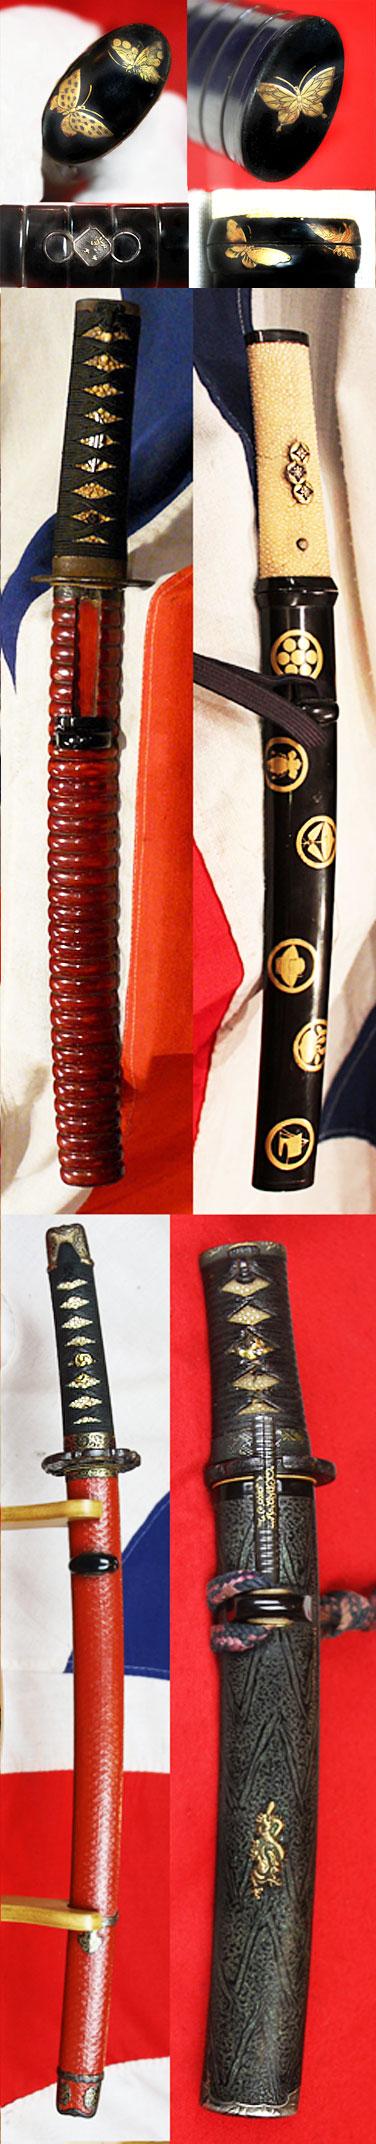 The Incredible Story of Japanese Urushi Lacquer on Our Original Ancient and Antique Samurai Swords, Tachi, Katana, Wakazashi and Tanto’s Saya and Fittings